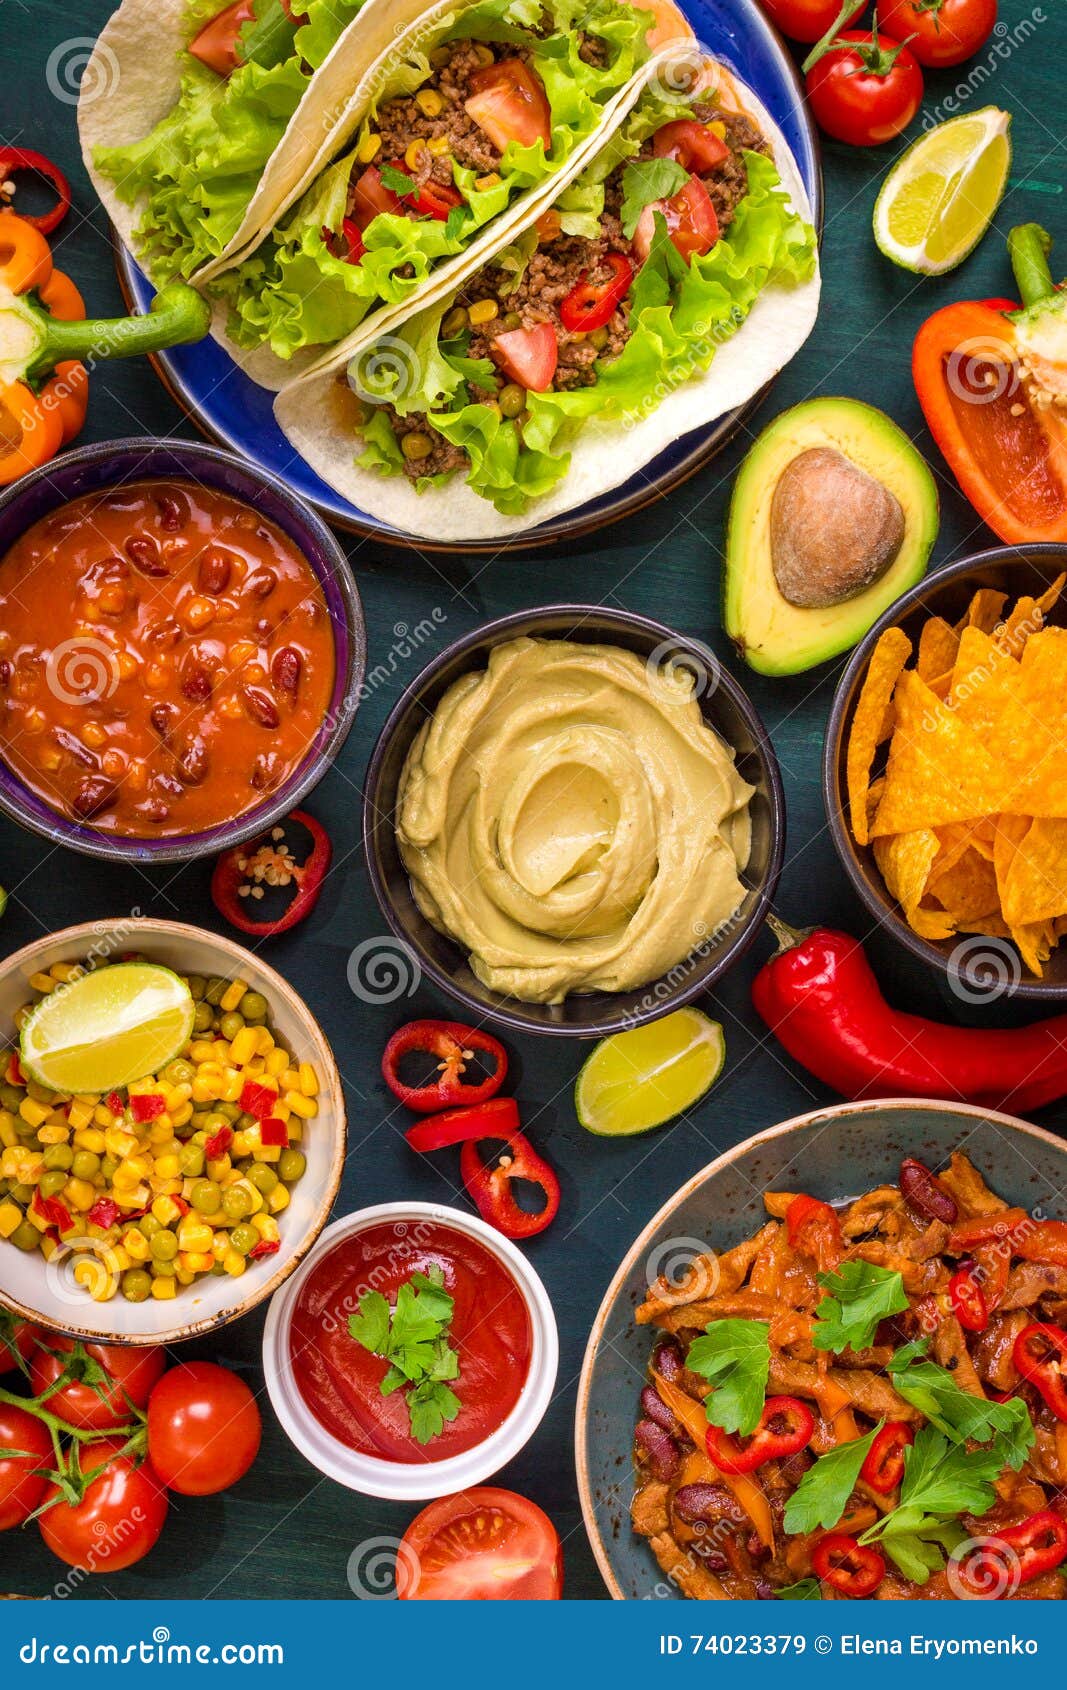 Mixed mexican food stock image Image of plate chili 